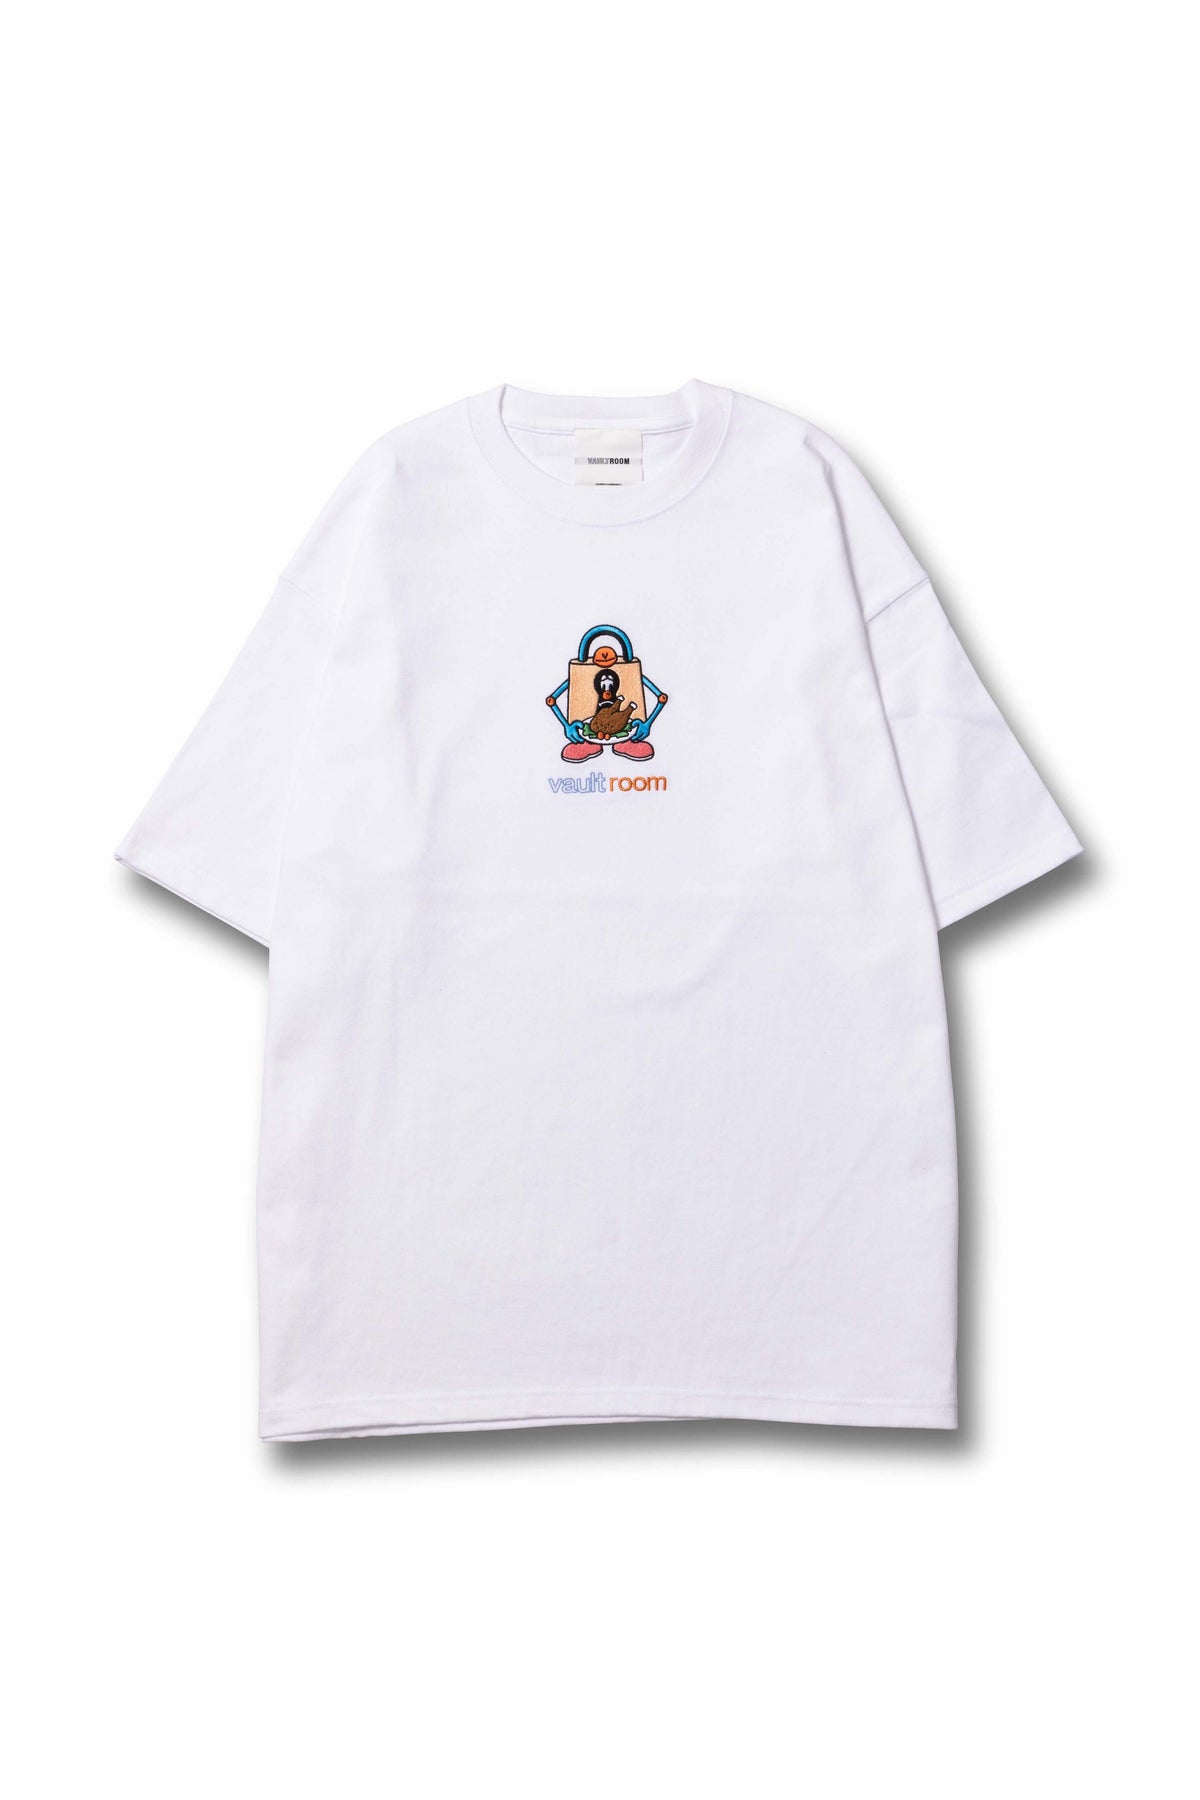 vaultroom CHICKEN TEE / WHT L sizehololive - Tシャツ/カットソー